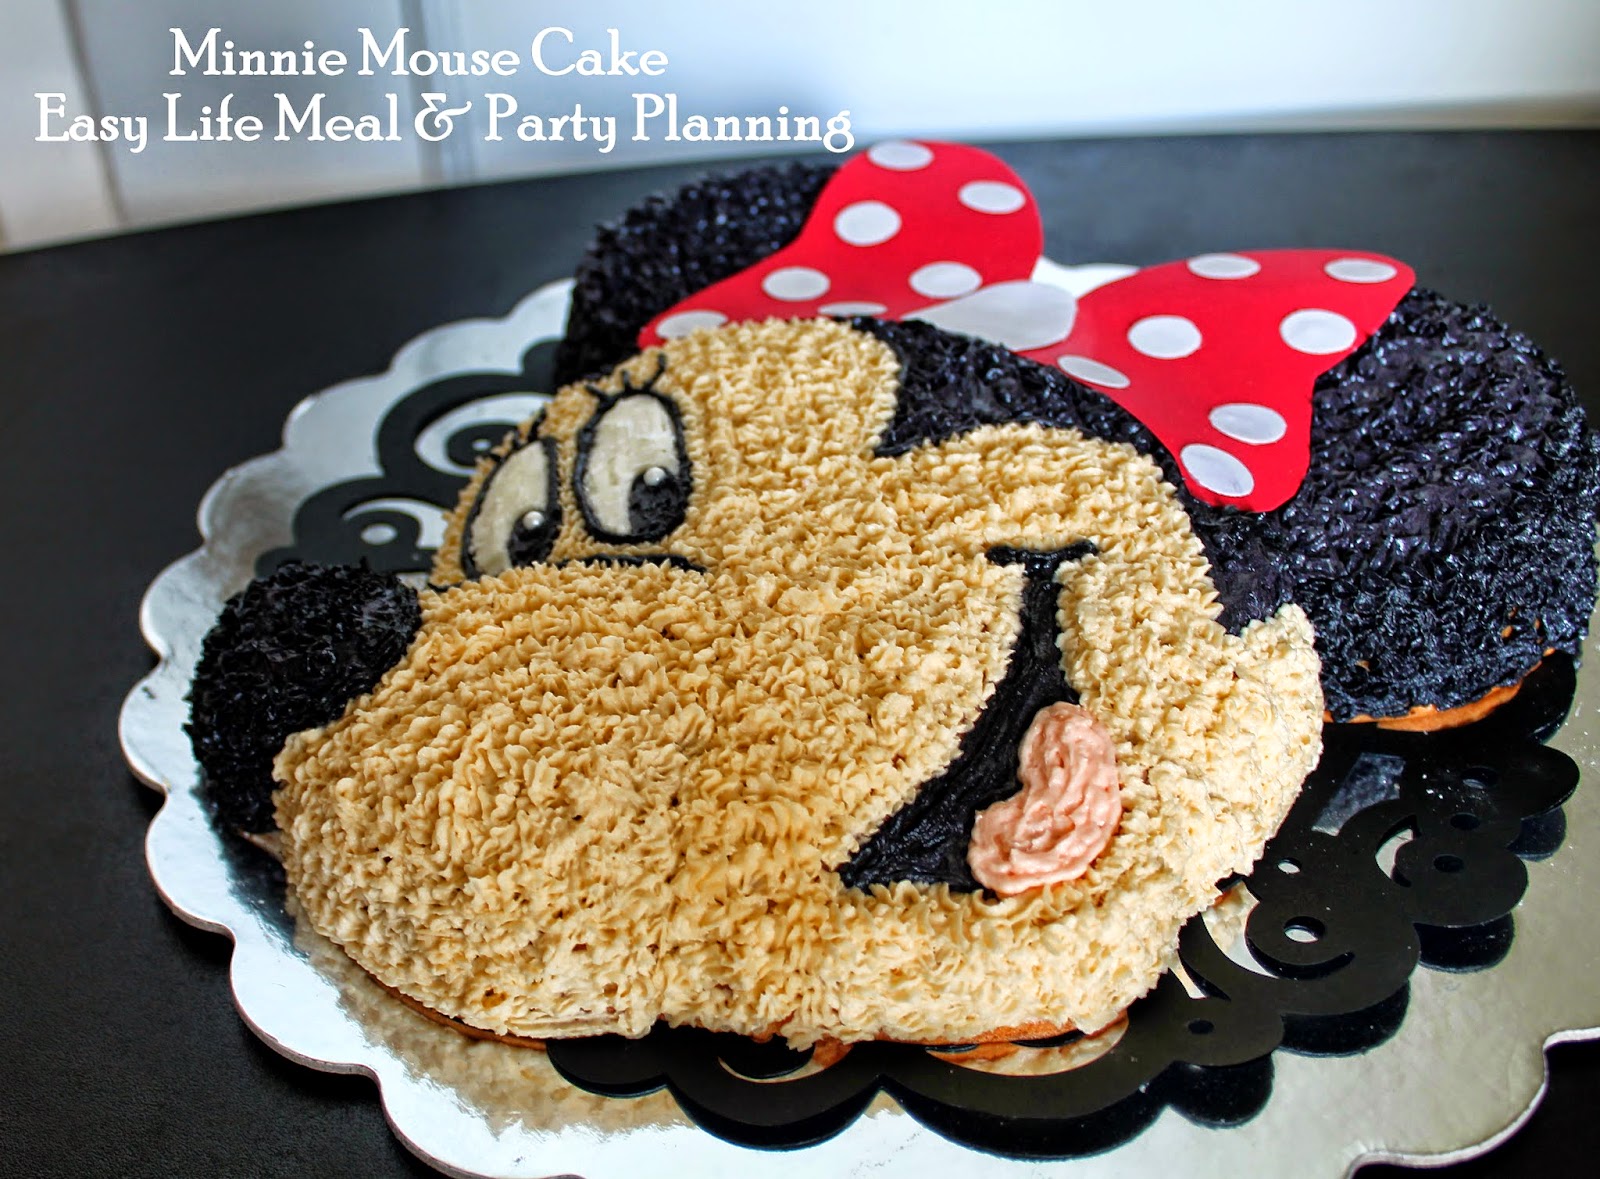 It's a Party - Minnie Mouse Birthday Party - Easy Life Meal & Party Planning